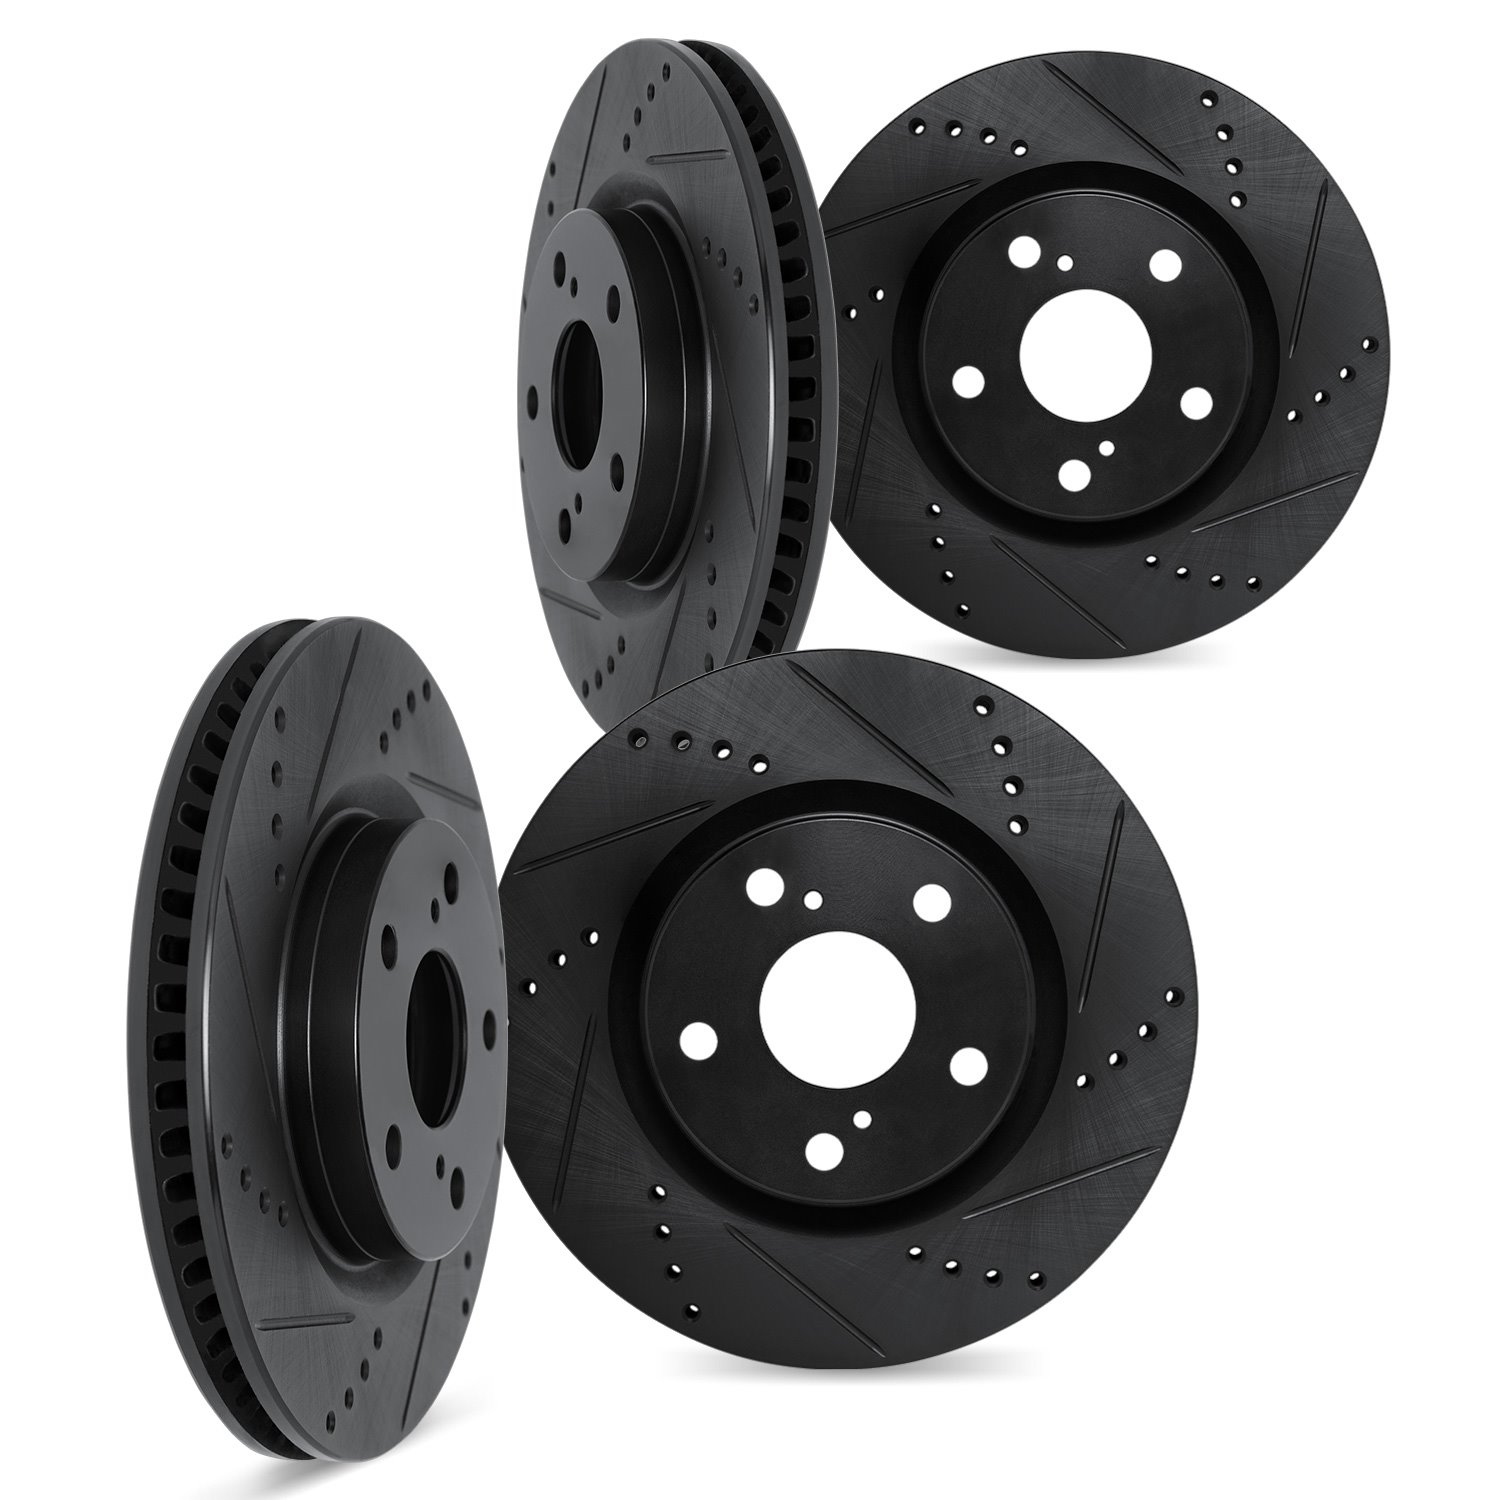 8004-68000 Drilled/Slotted Brake Rotors [Black], Fits Select Infiniti/Nissan, Position: Front and Rear